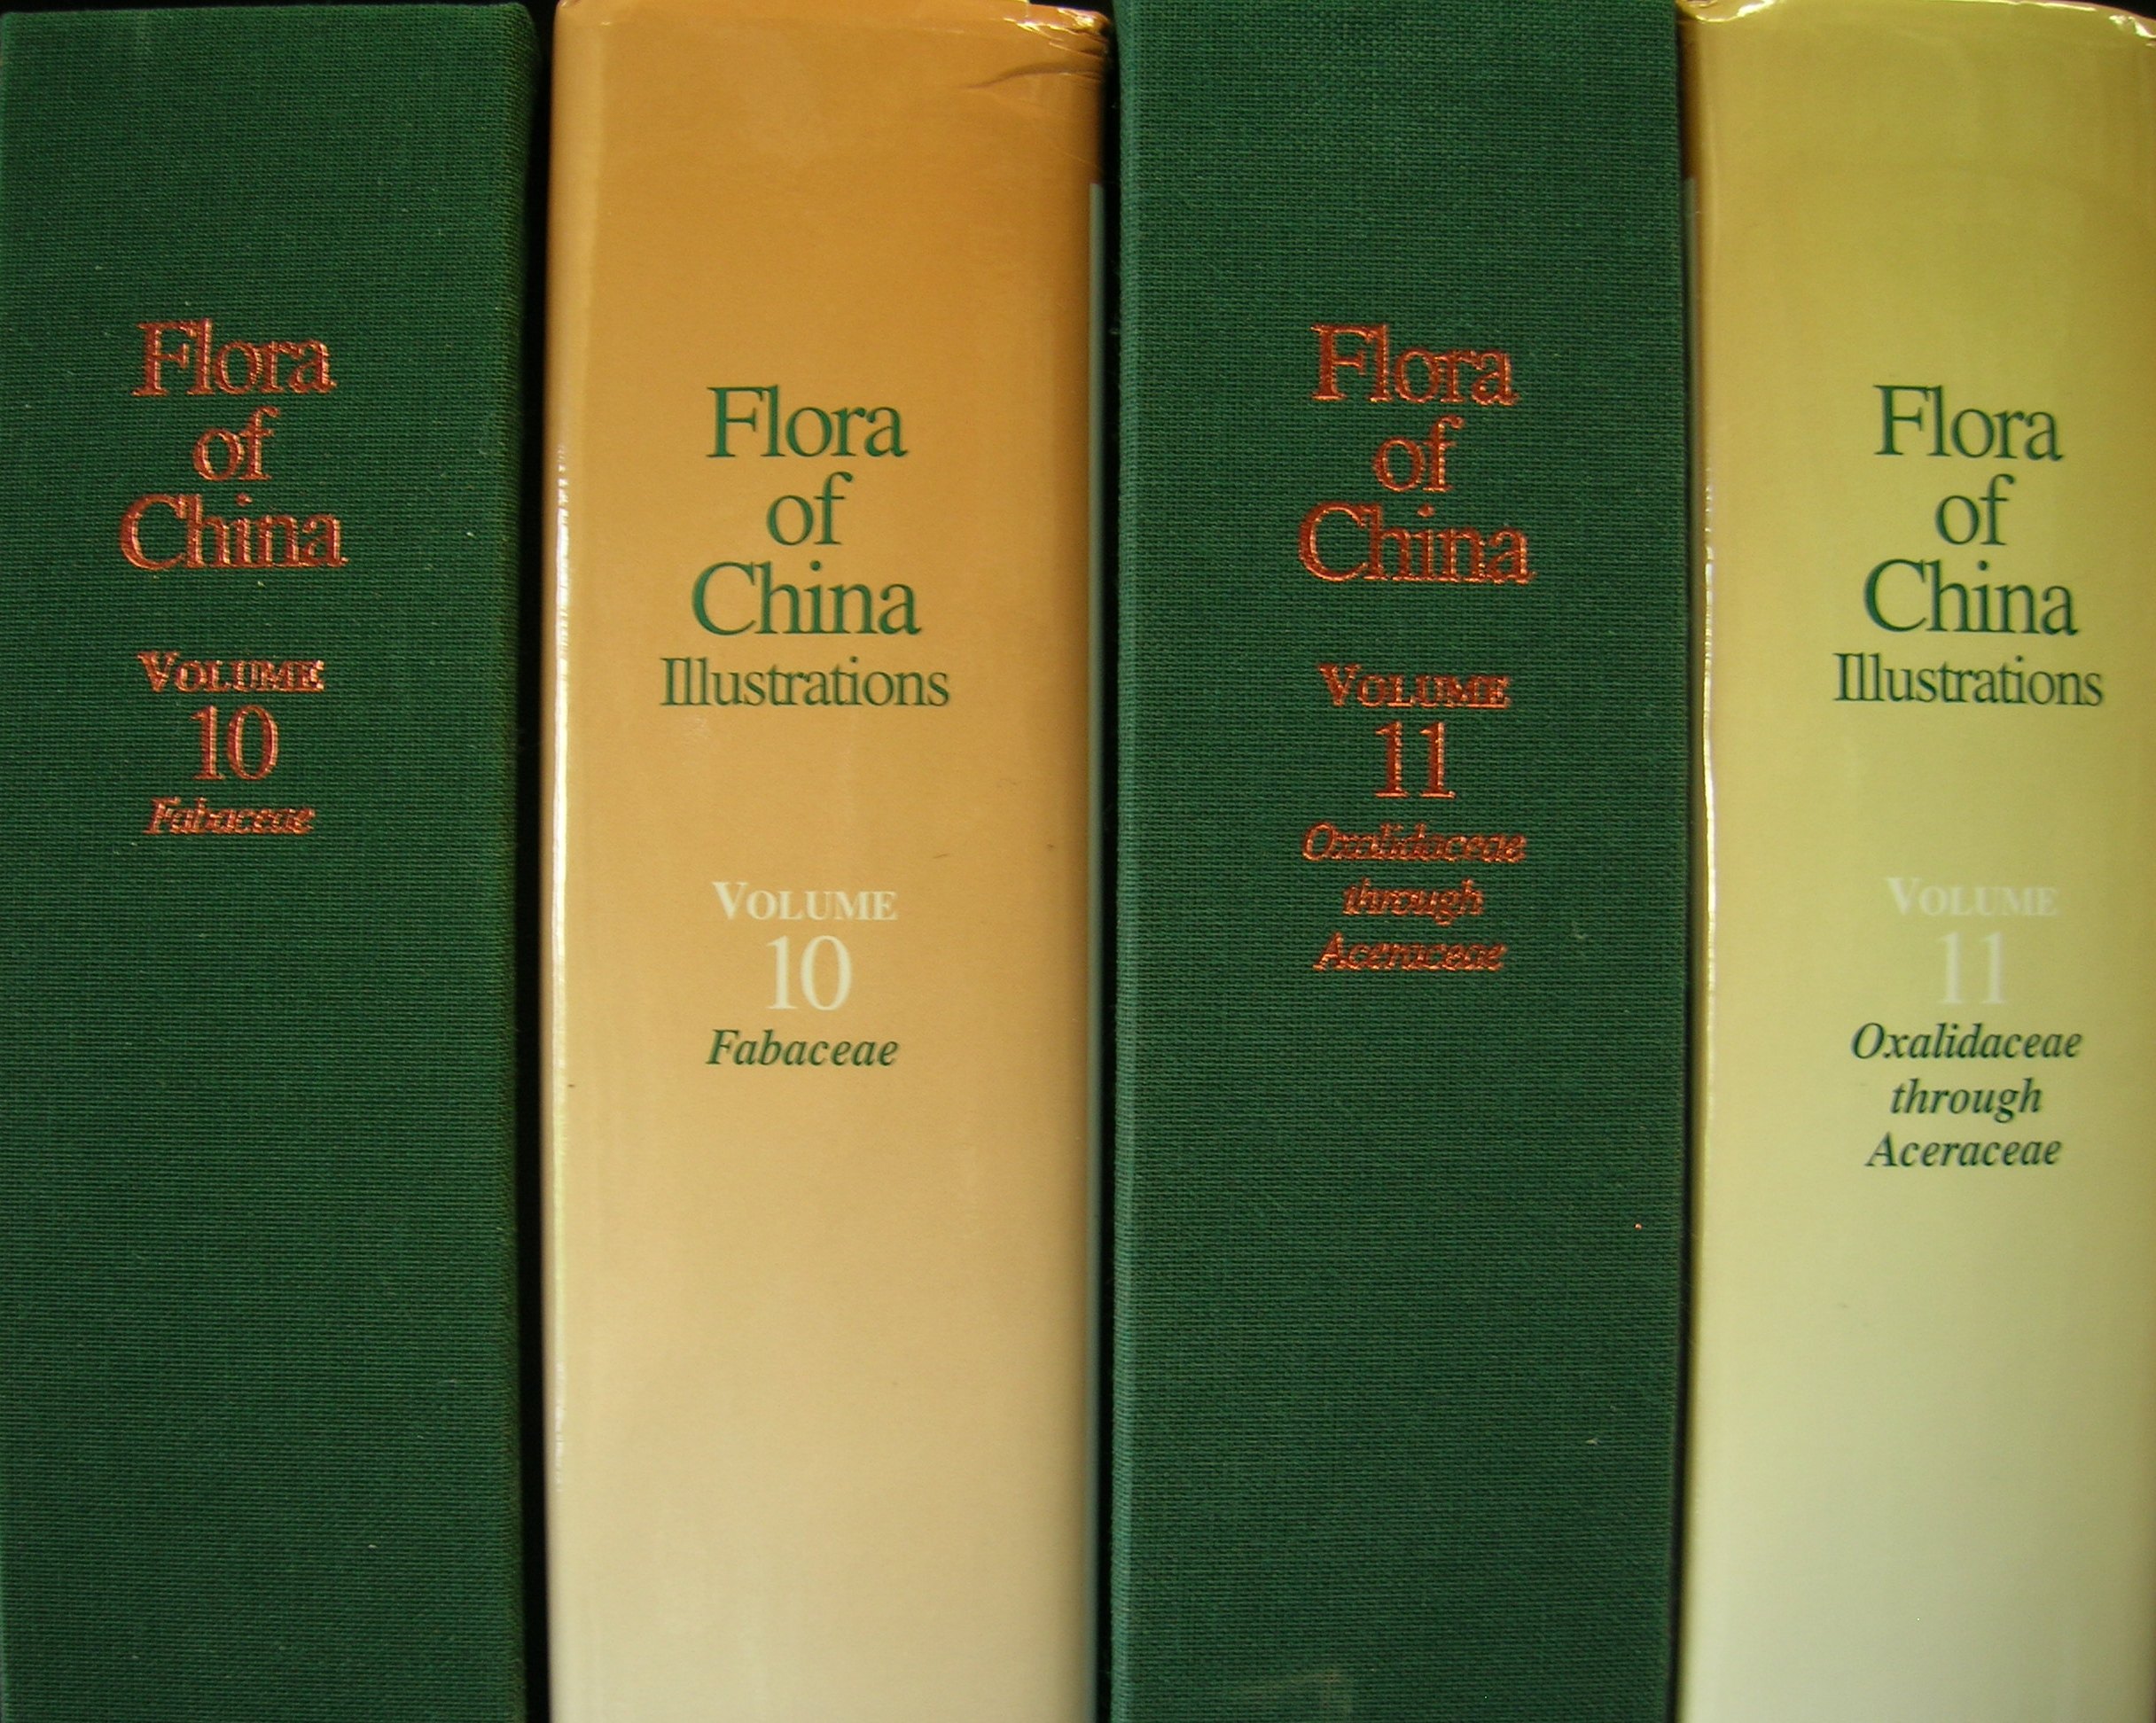 Flora_of_China_spines